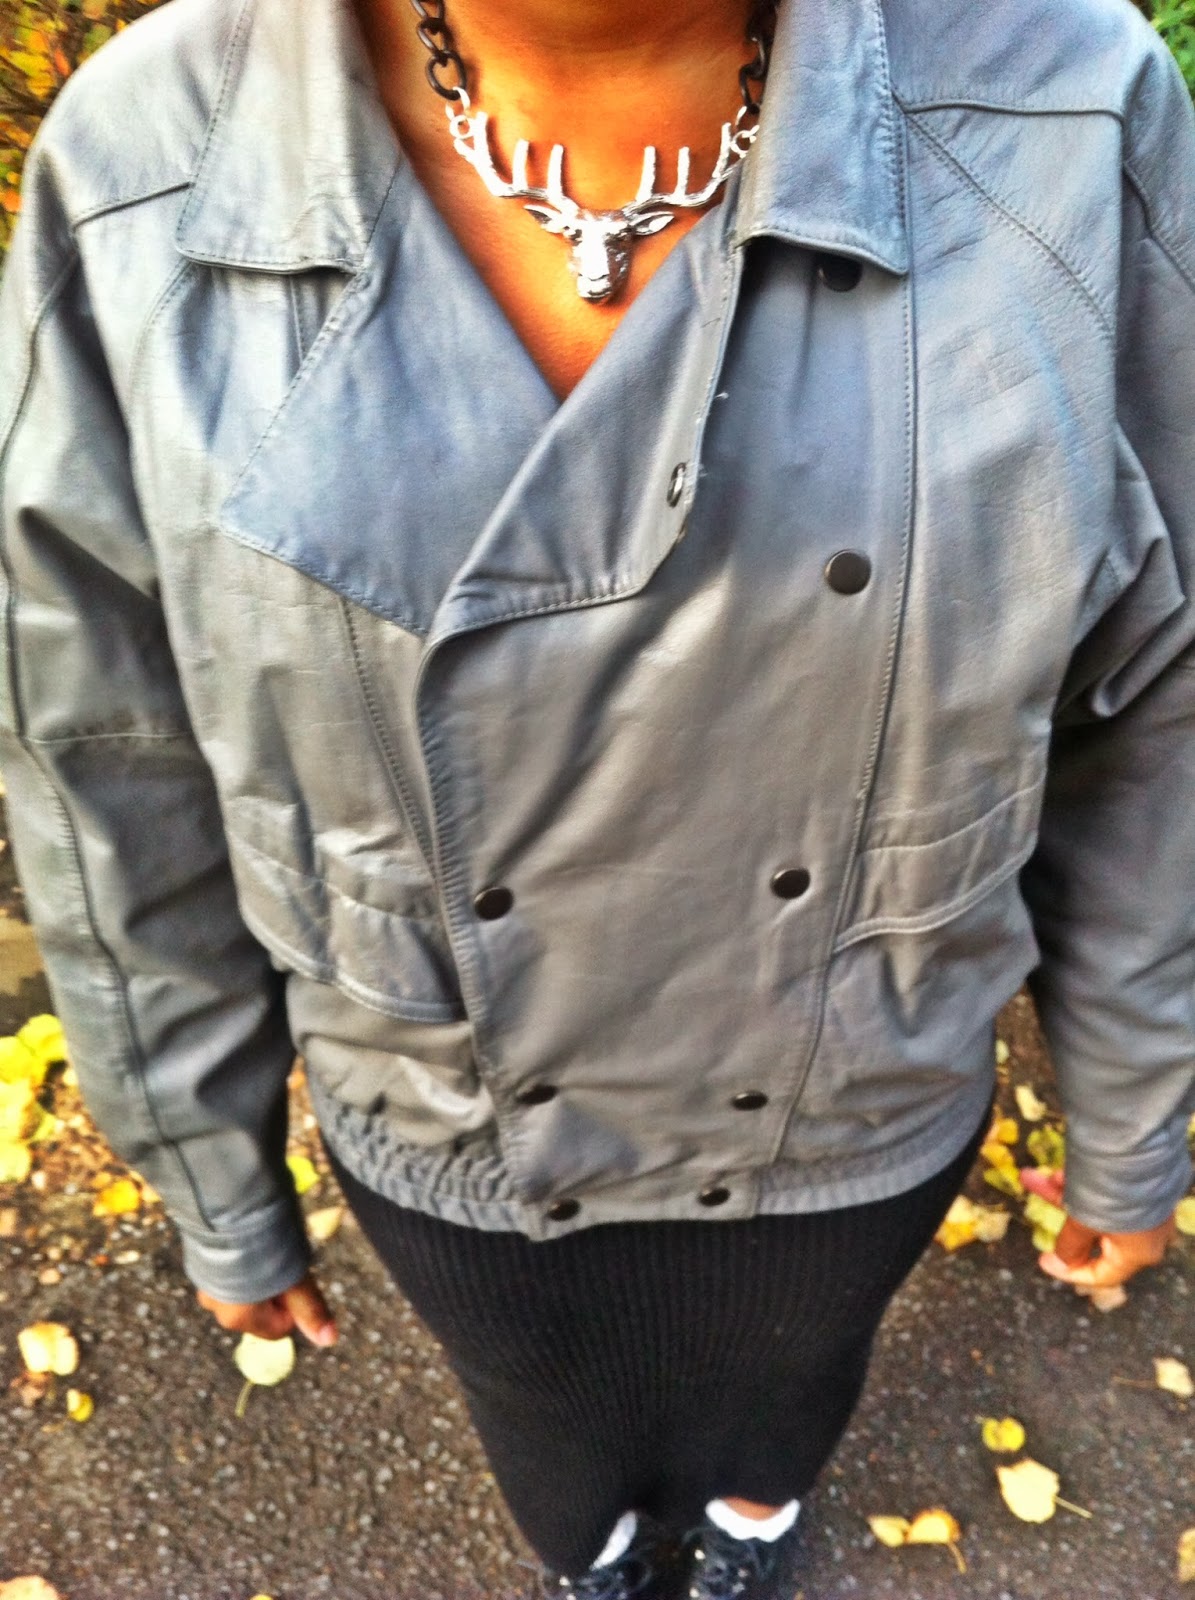 I MUST CONFESS I'M ADDICTED TO FASHION: AND ANOTHER LEATHER JACKET